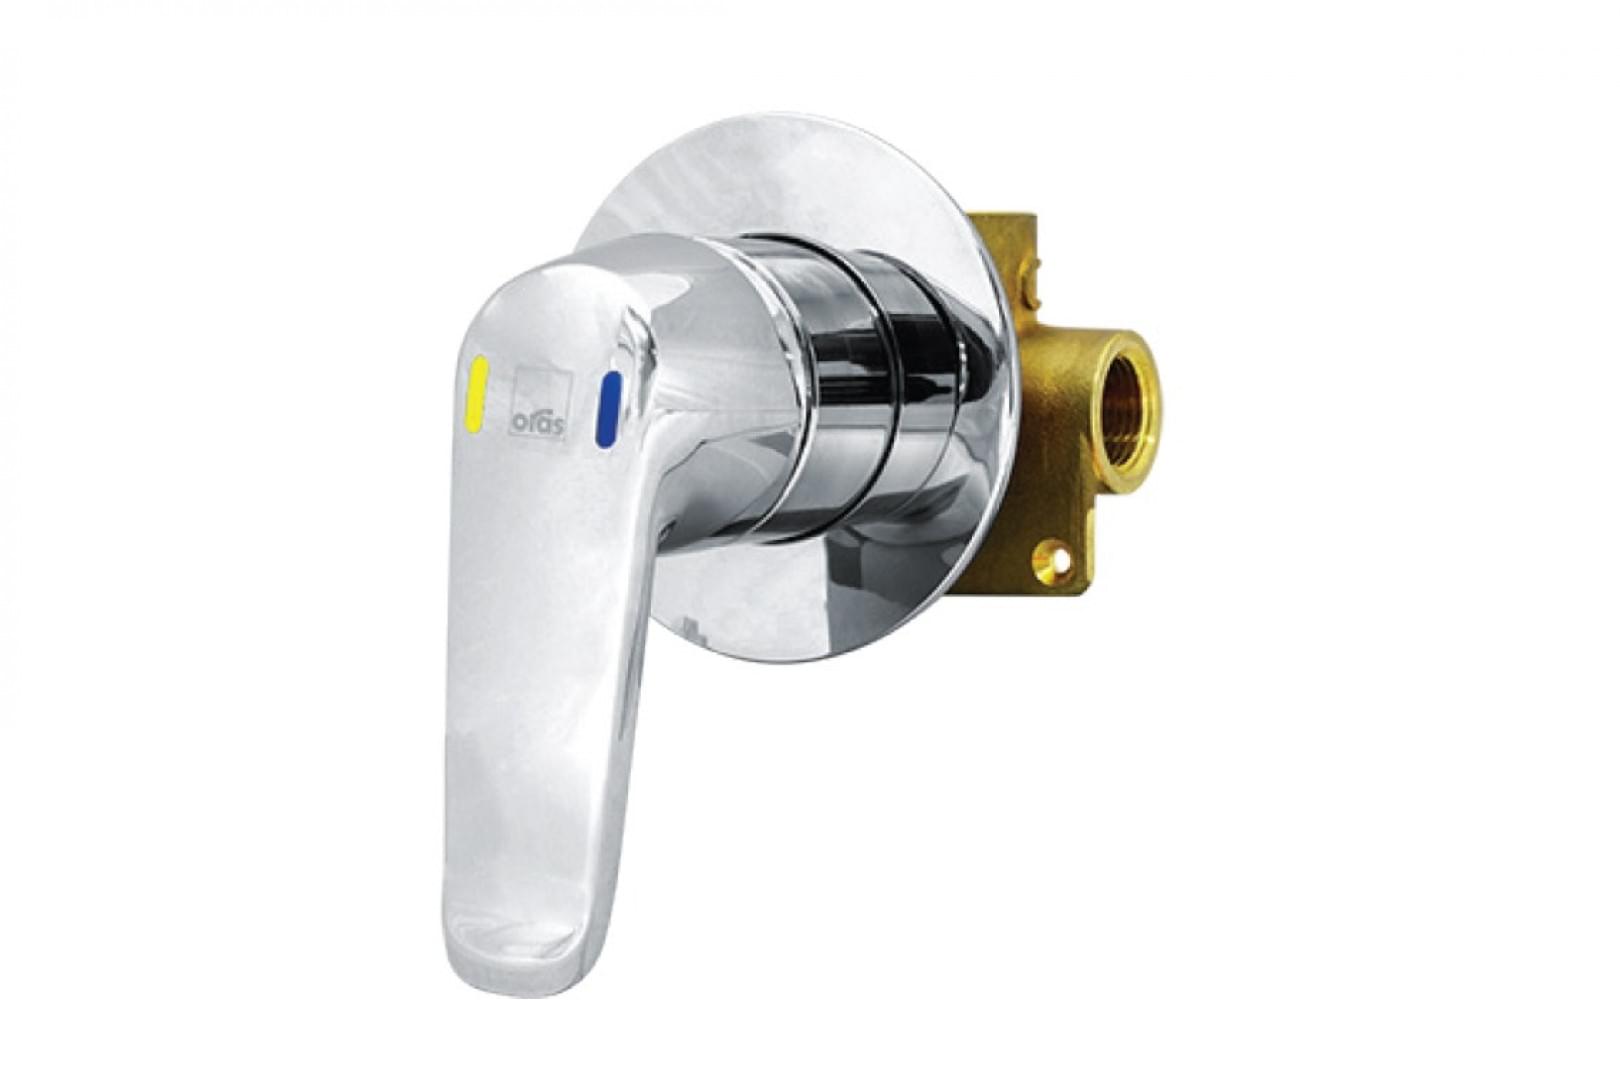 Enware-Oras Safira In-Wall Compact Shower Mixer - SAF608-RB from Enware